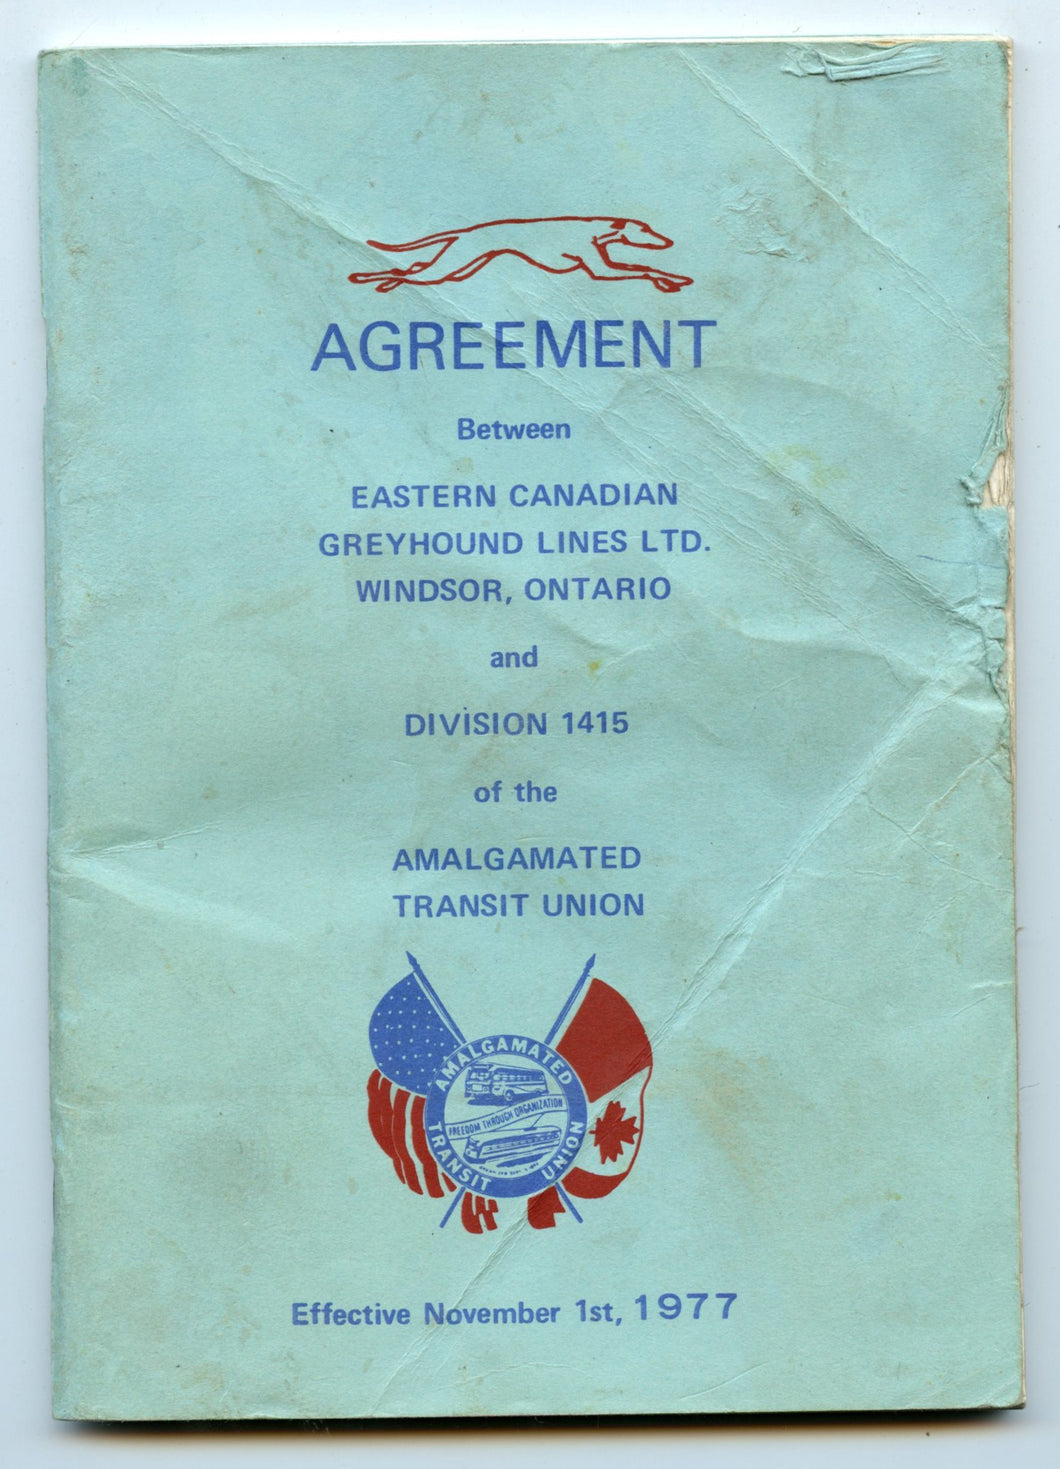 Agreement Between Eastern Canadian Greyhound Lines Ltd. Windsor, Ontario and Division 1415 of the Amalgamated Transit Union